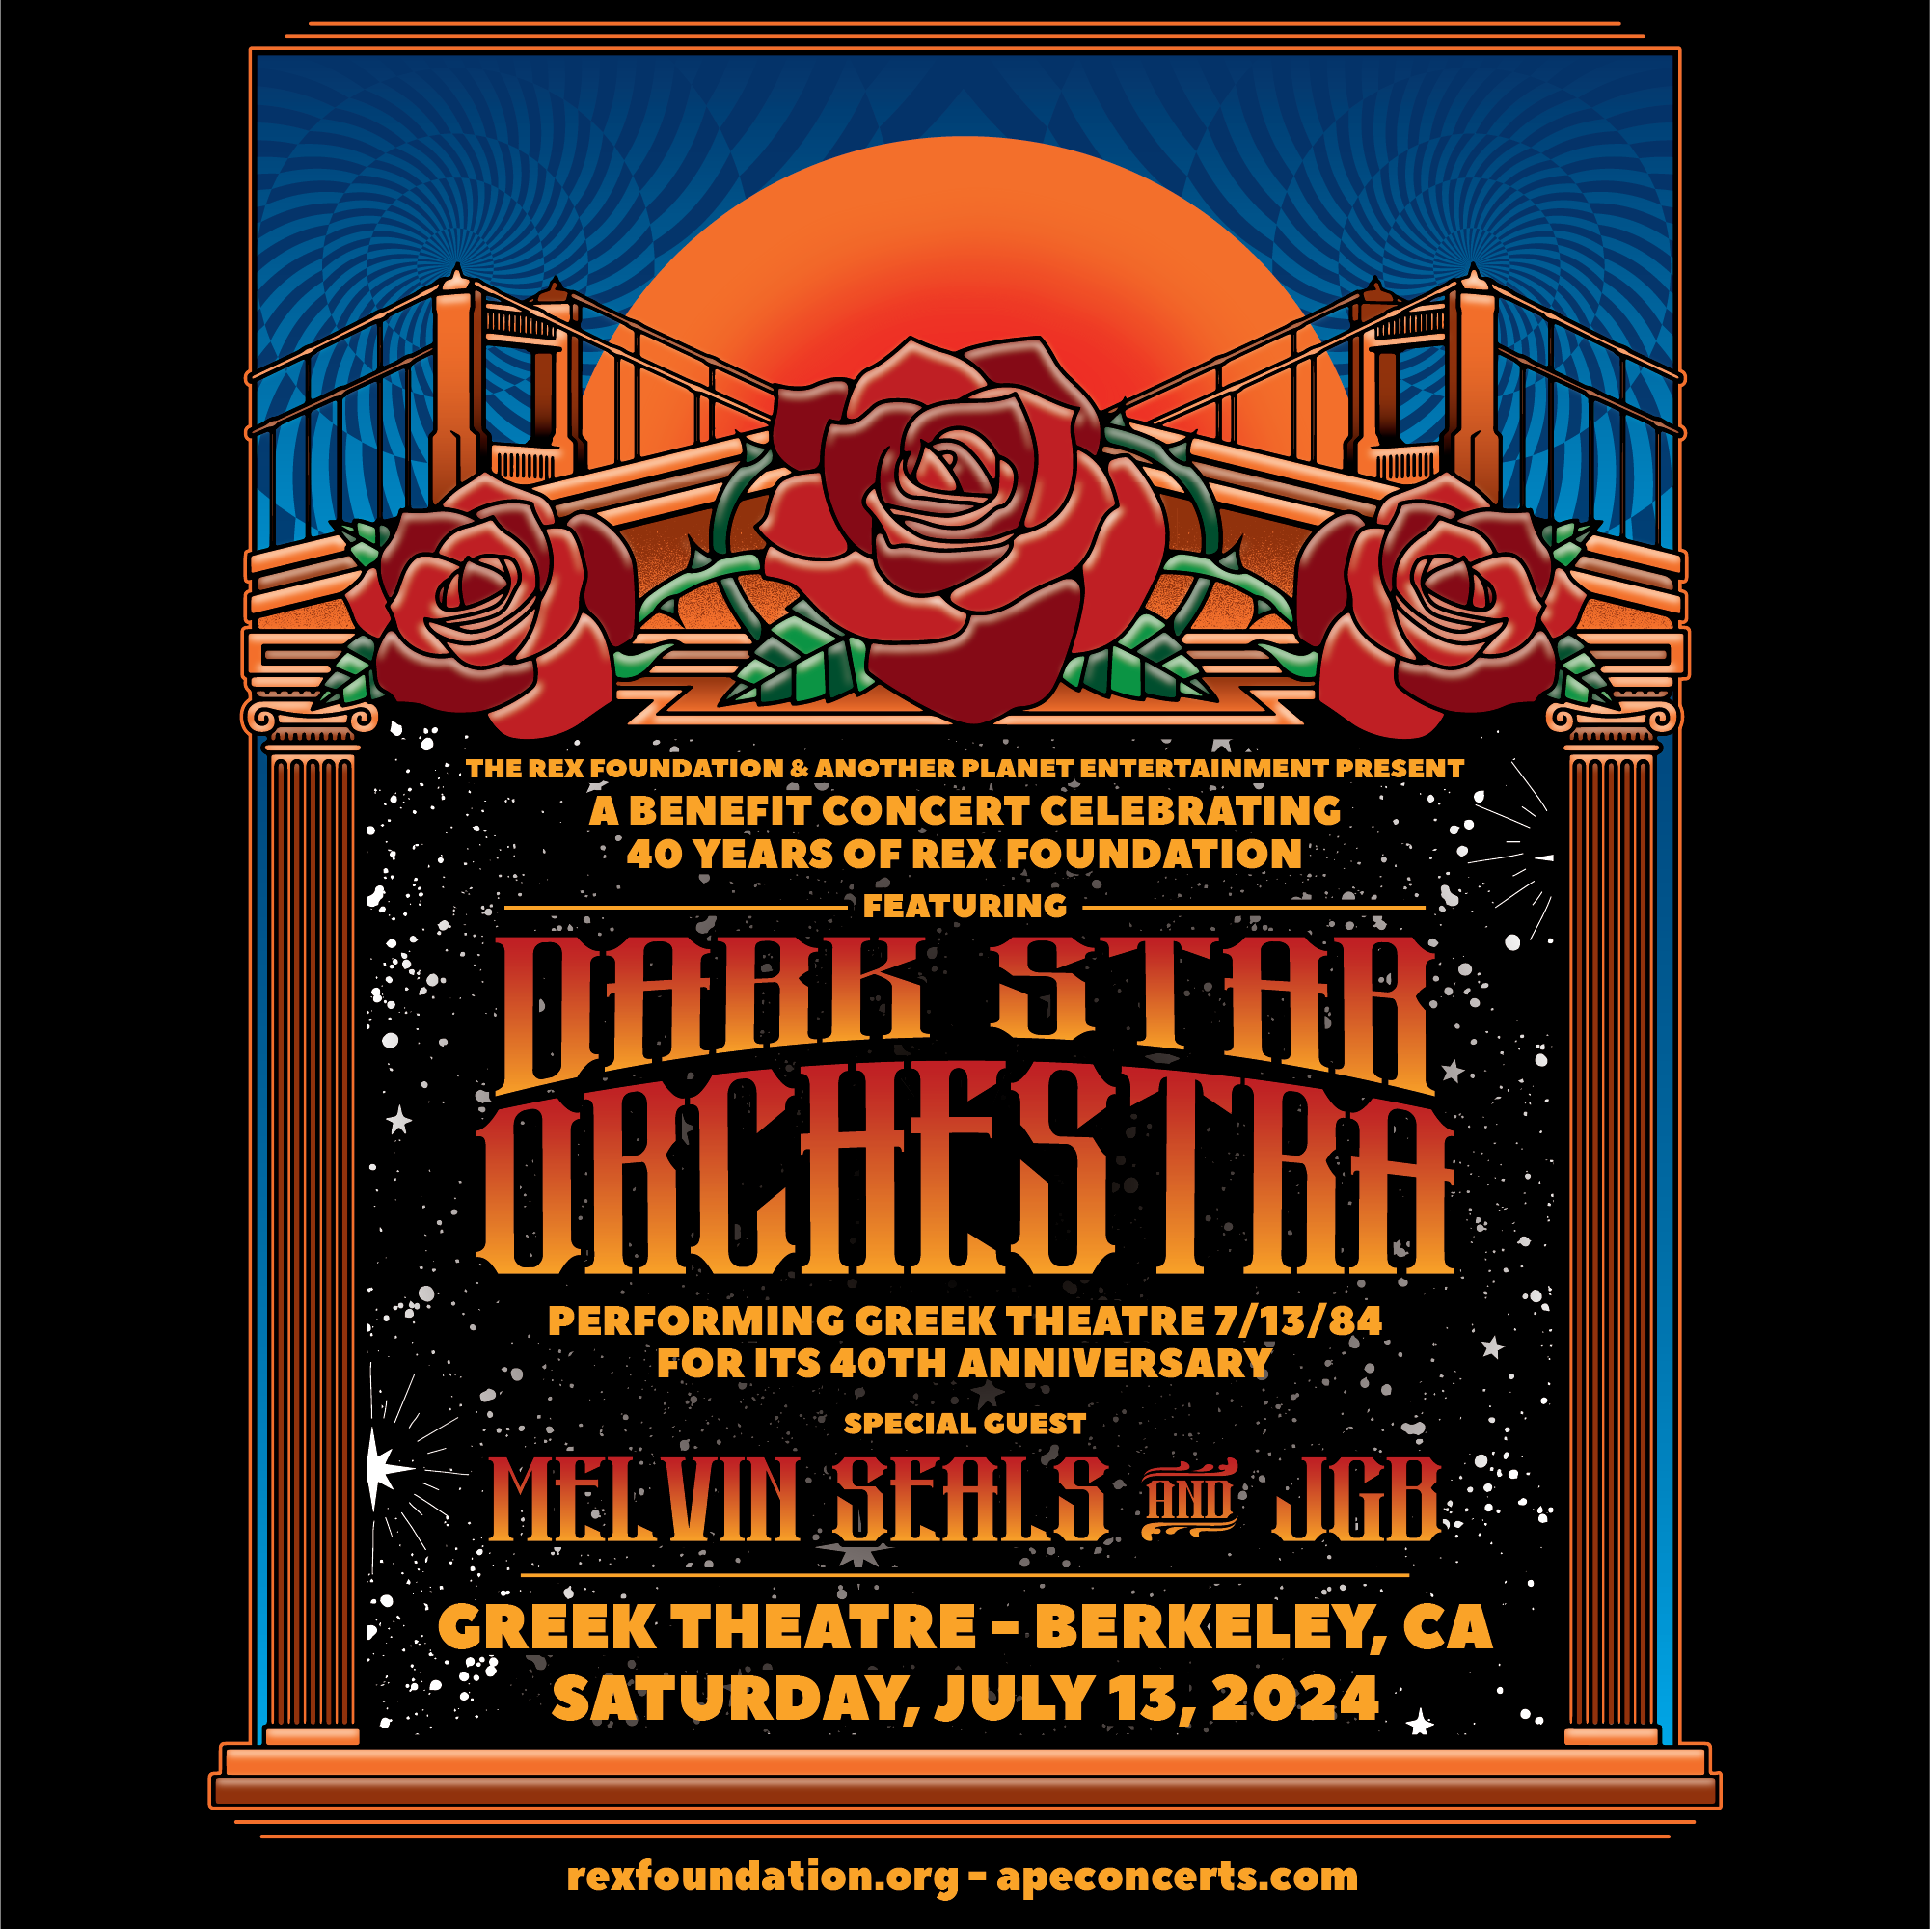 Rex Foundation to Celebrate its 40th Anniversary With Dark Star Orchestra, Melvin Seals & JGB at Berkeley’s Greek Theatre on July 13, 2024